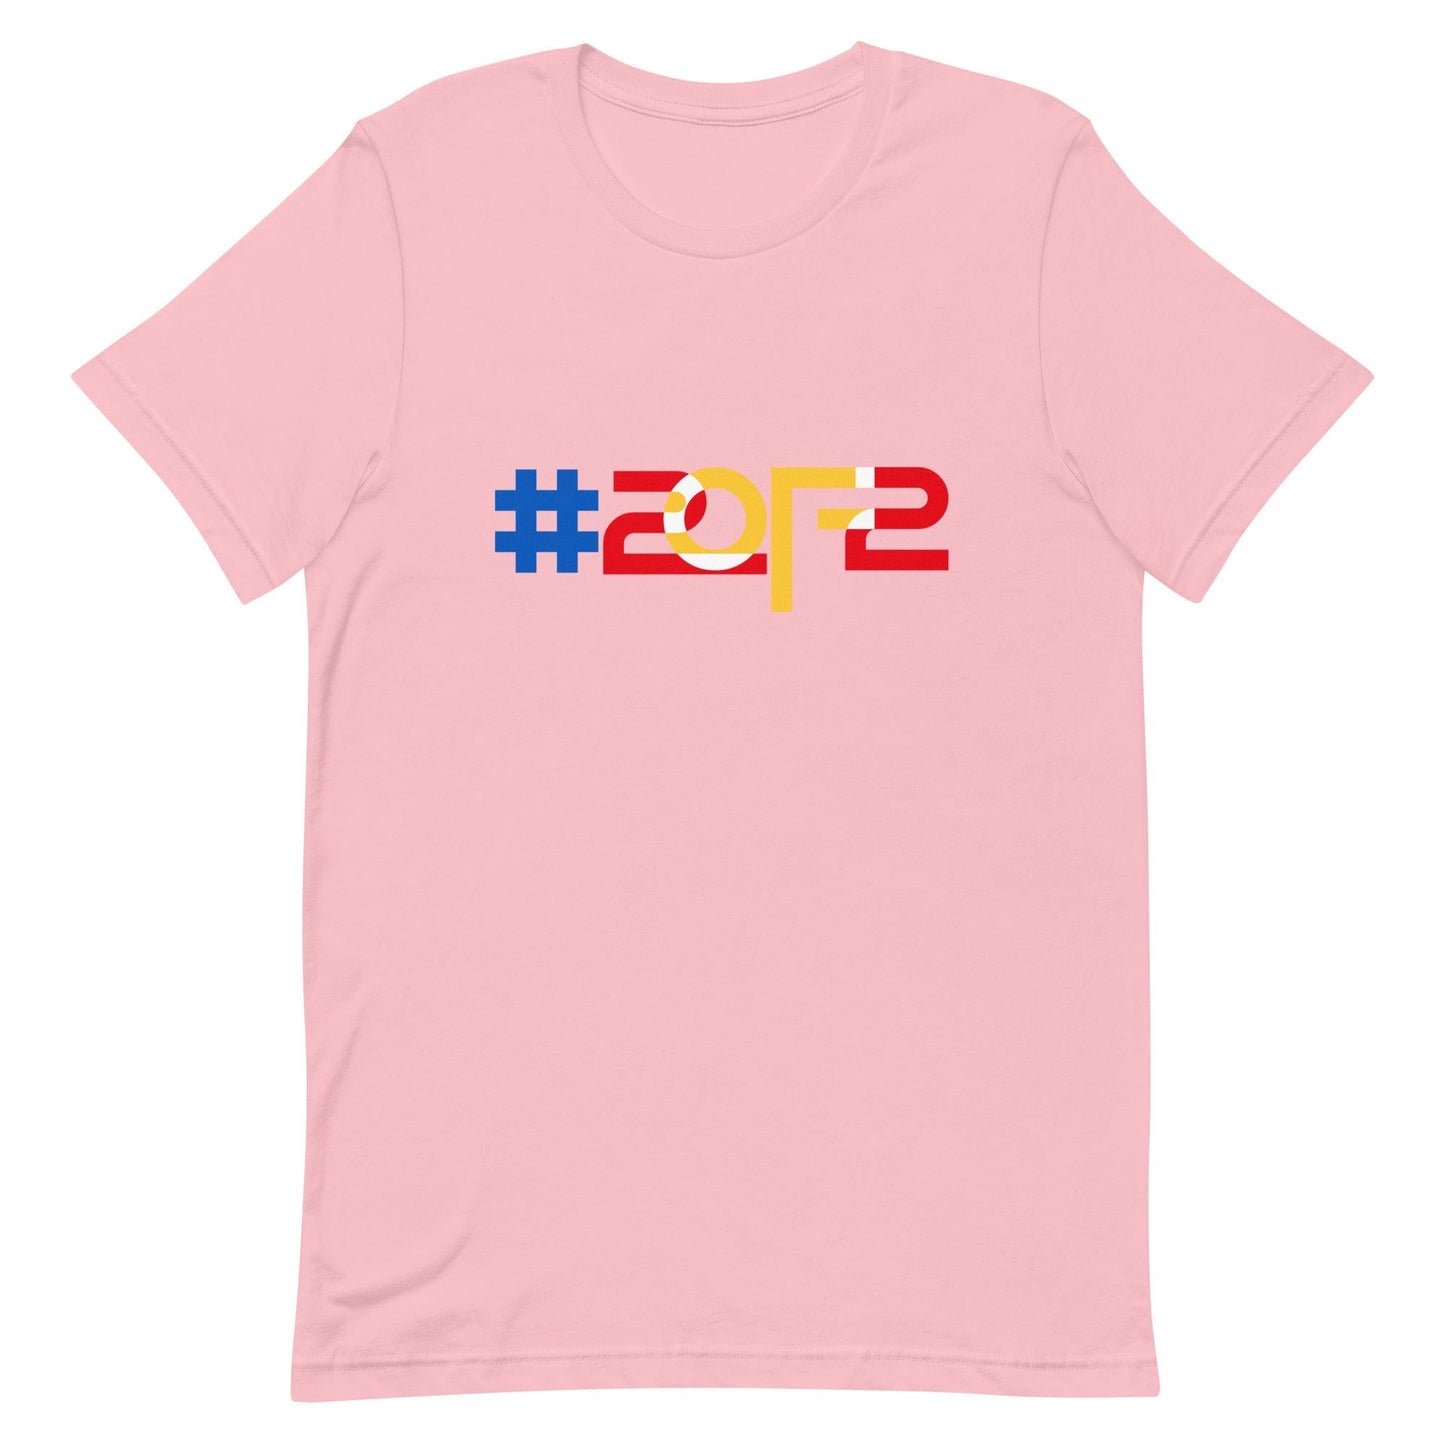 Cobee Bryant "2 of 2" t-shirt - Fan Arch